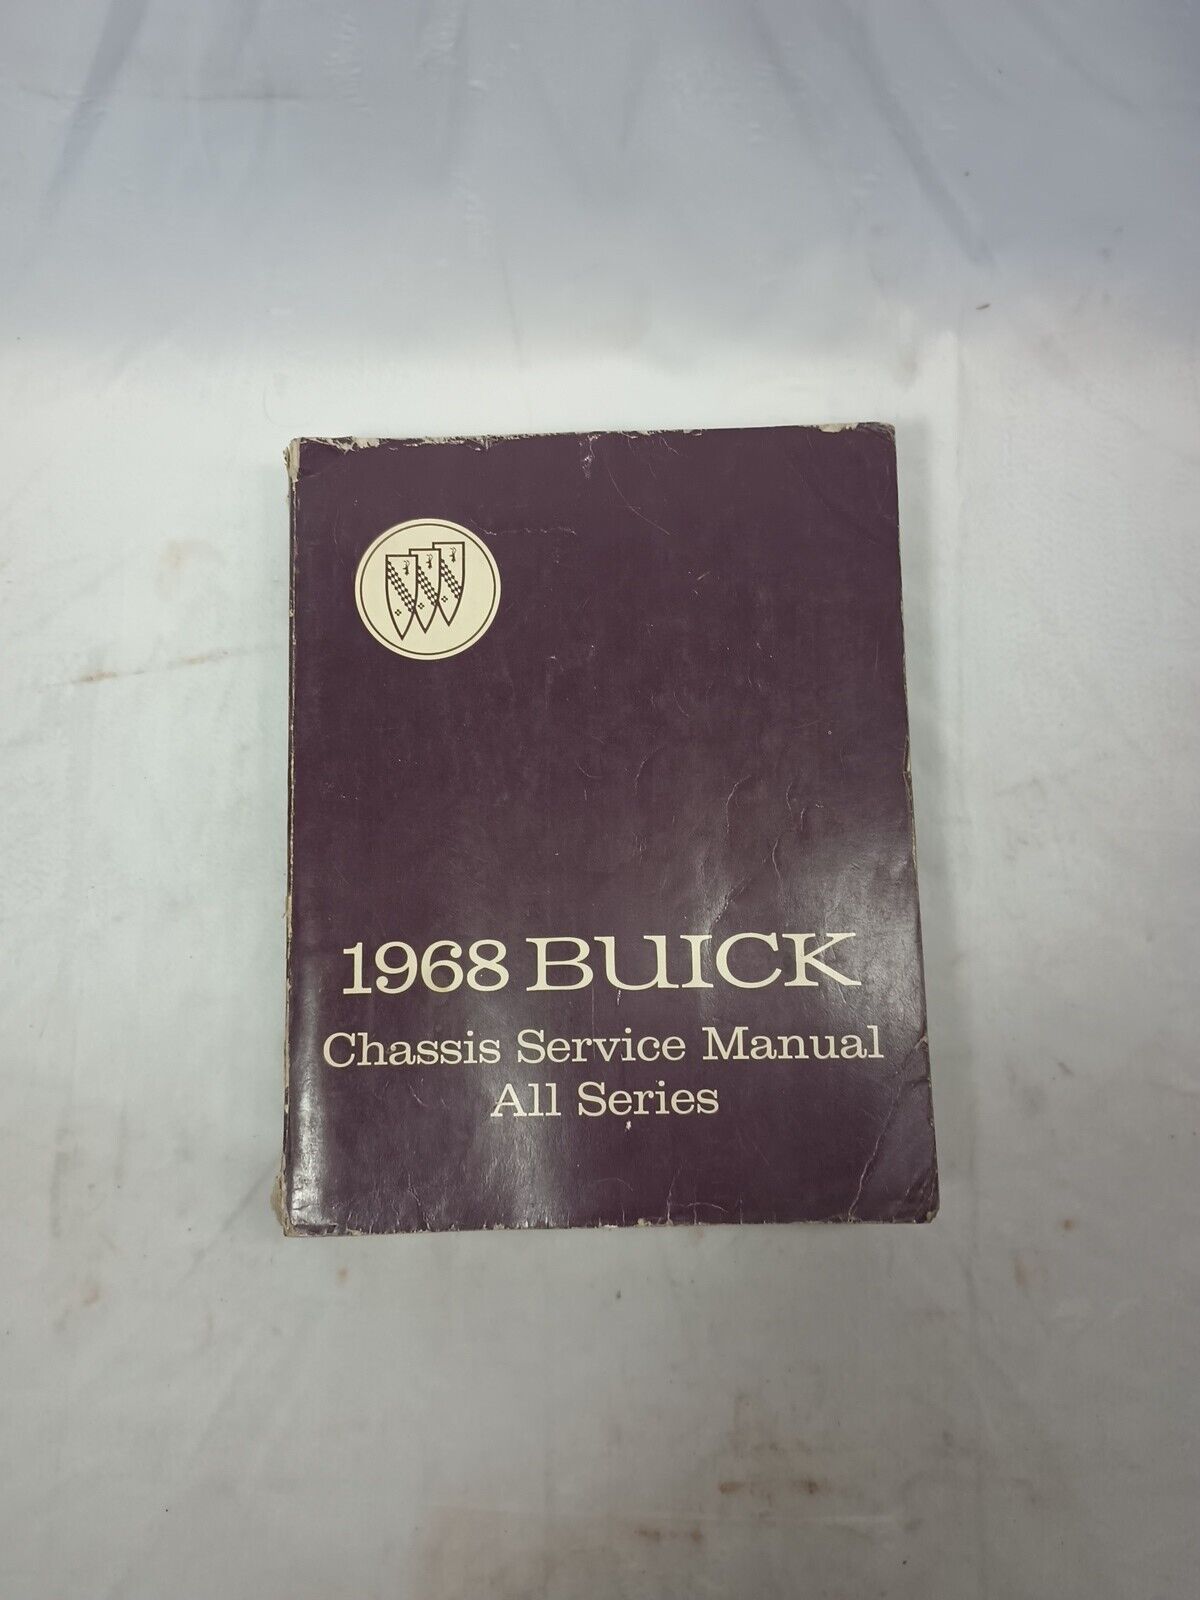 Original 1968 Buick Chassis Service Manual All Series G26